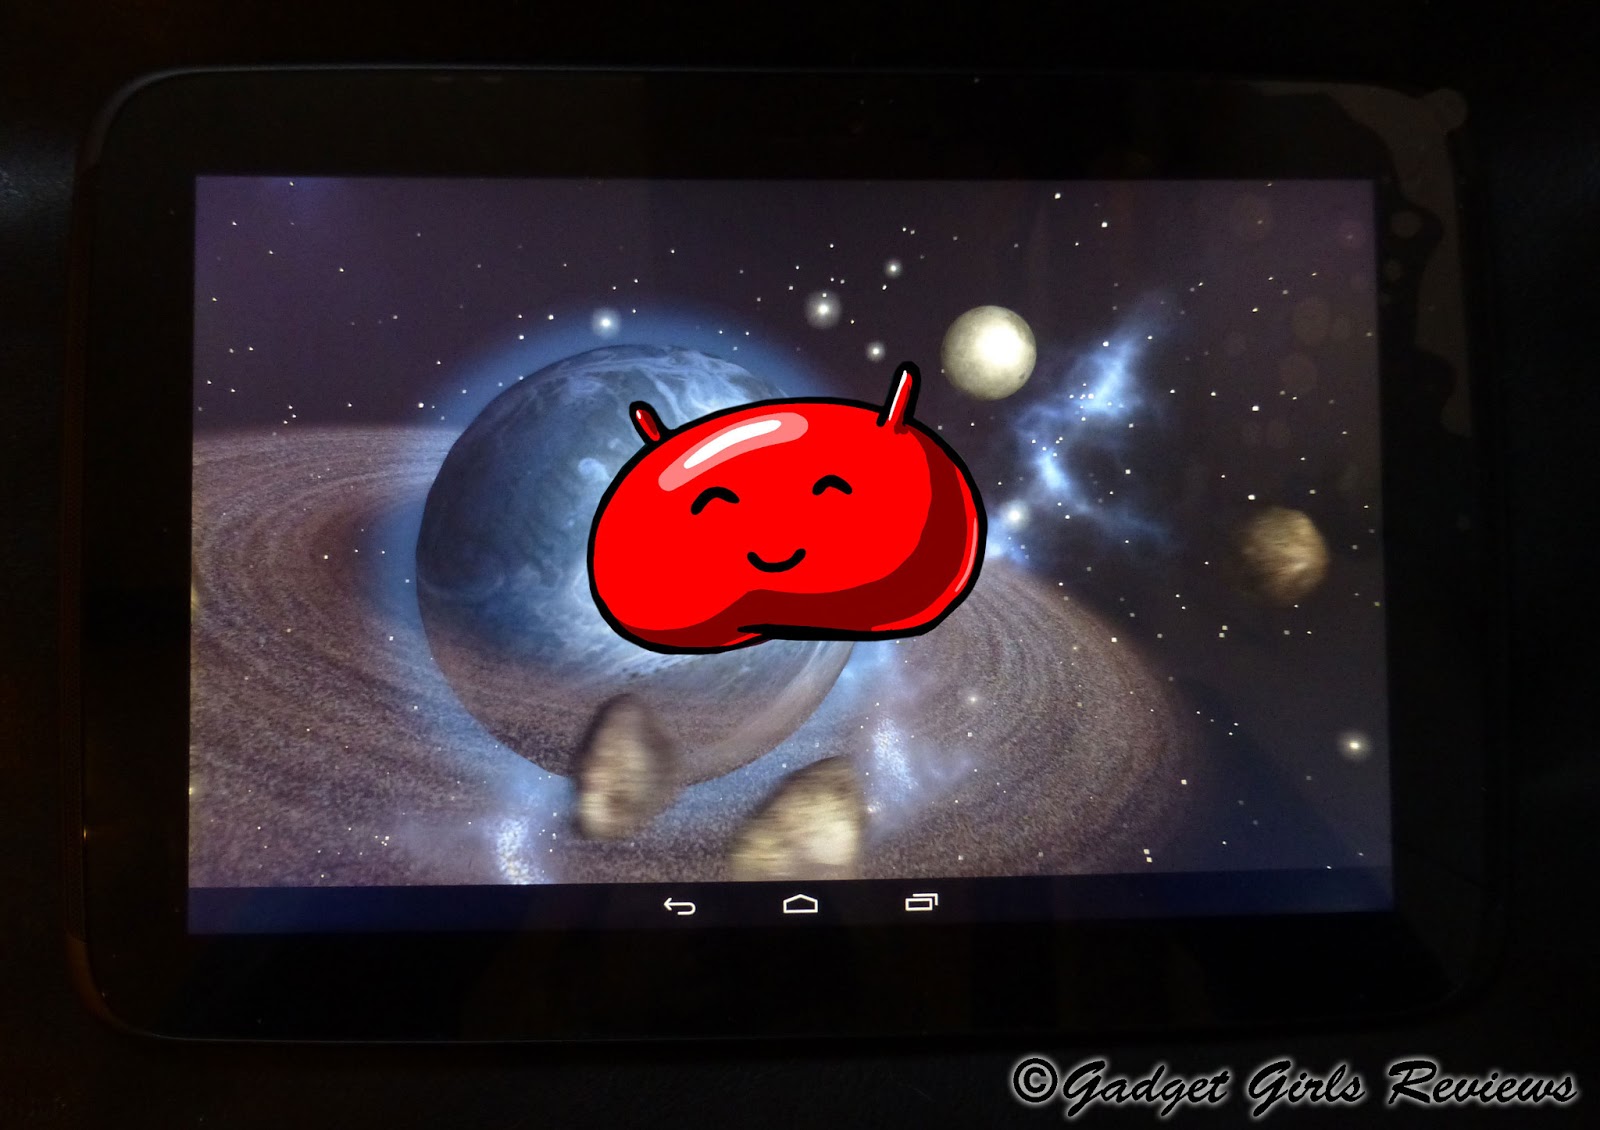 Gadget Girls Reviews: Beanflinger and some facts about the Nexus 10